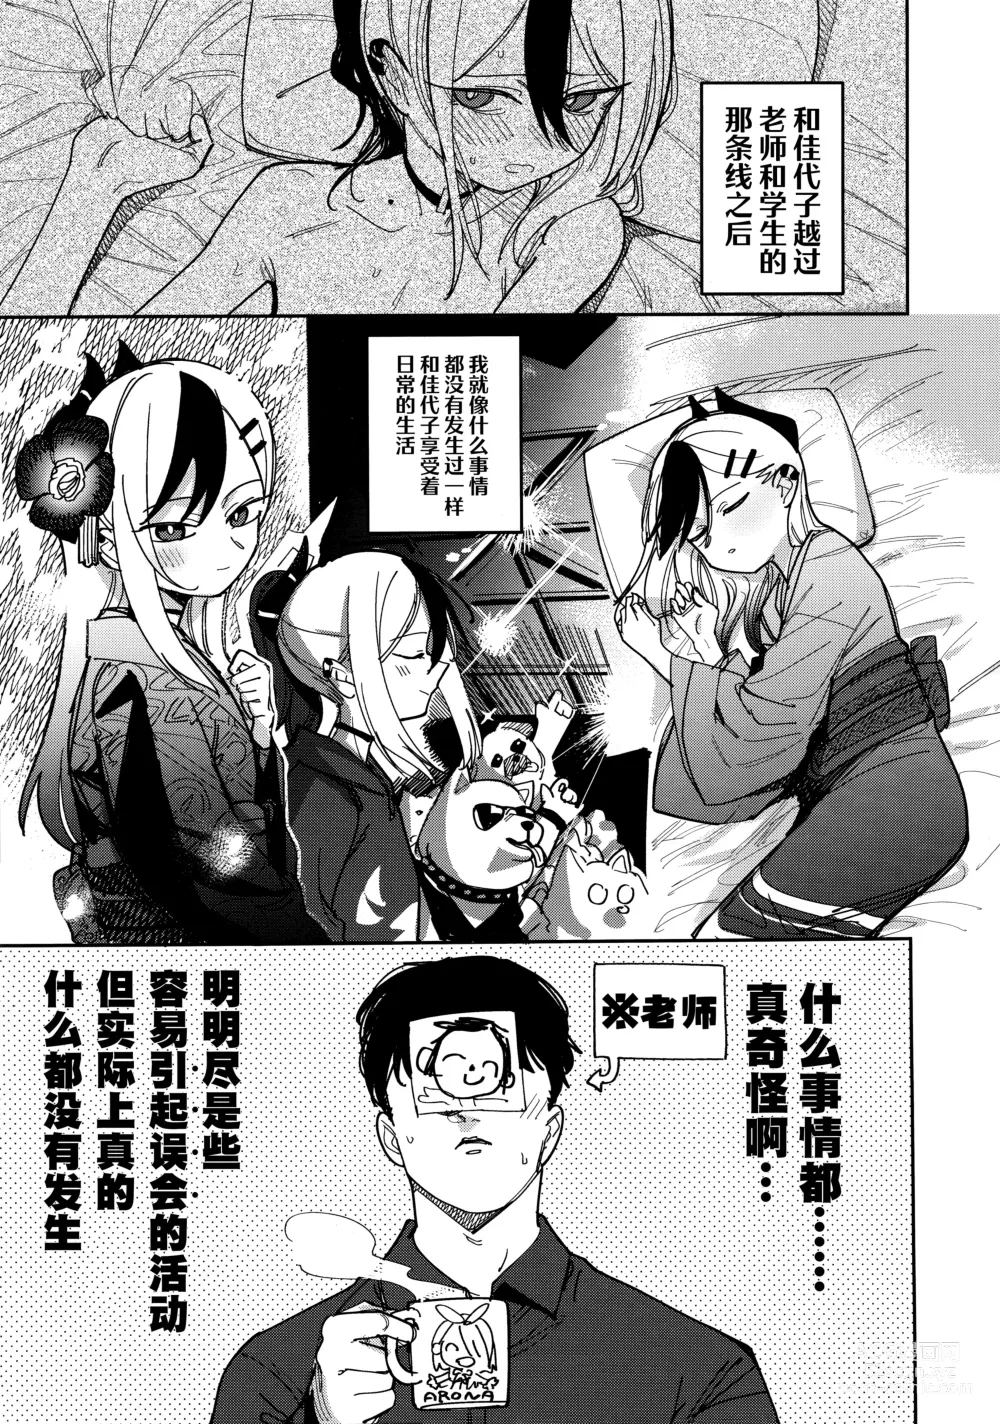 Page 3 of doujinshi 鬼方佳代子不会做这种事情 Part.2